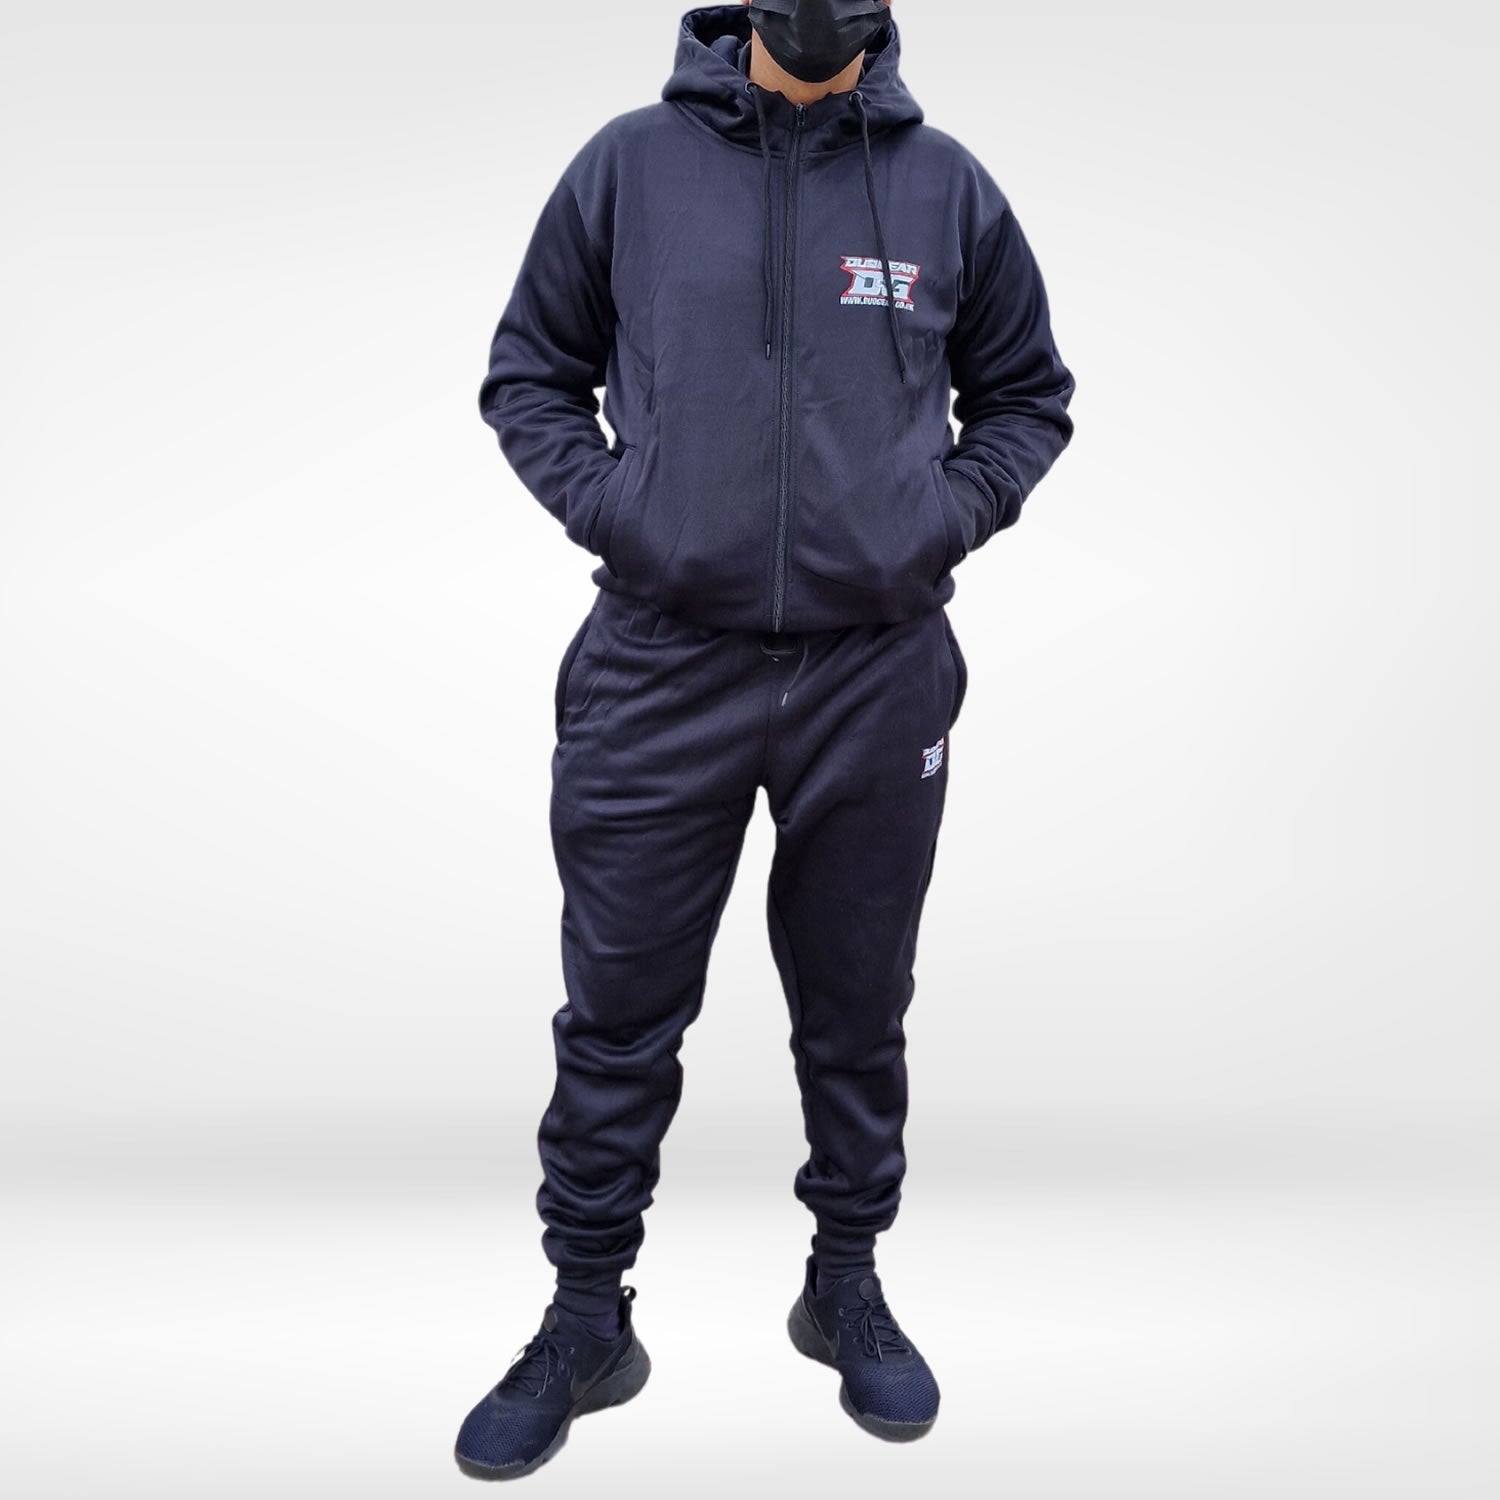 BLACK DUO GEAR POLYESTER FLEECE TRAINING & CASUAL TRACKSUIT